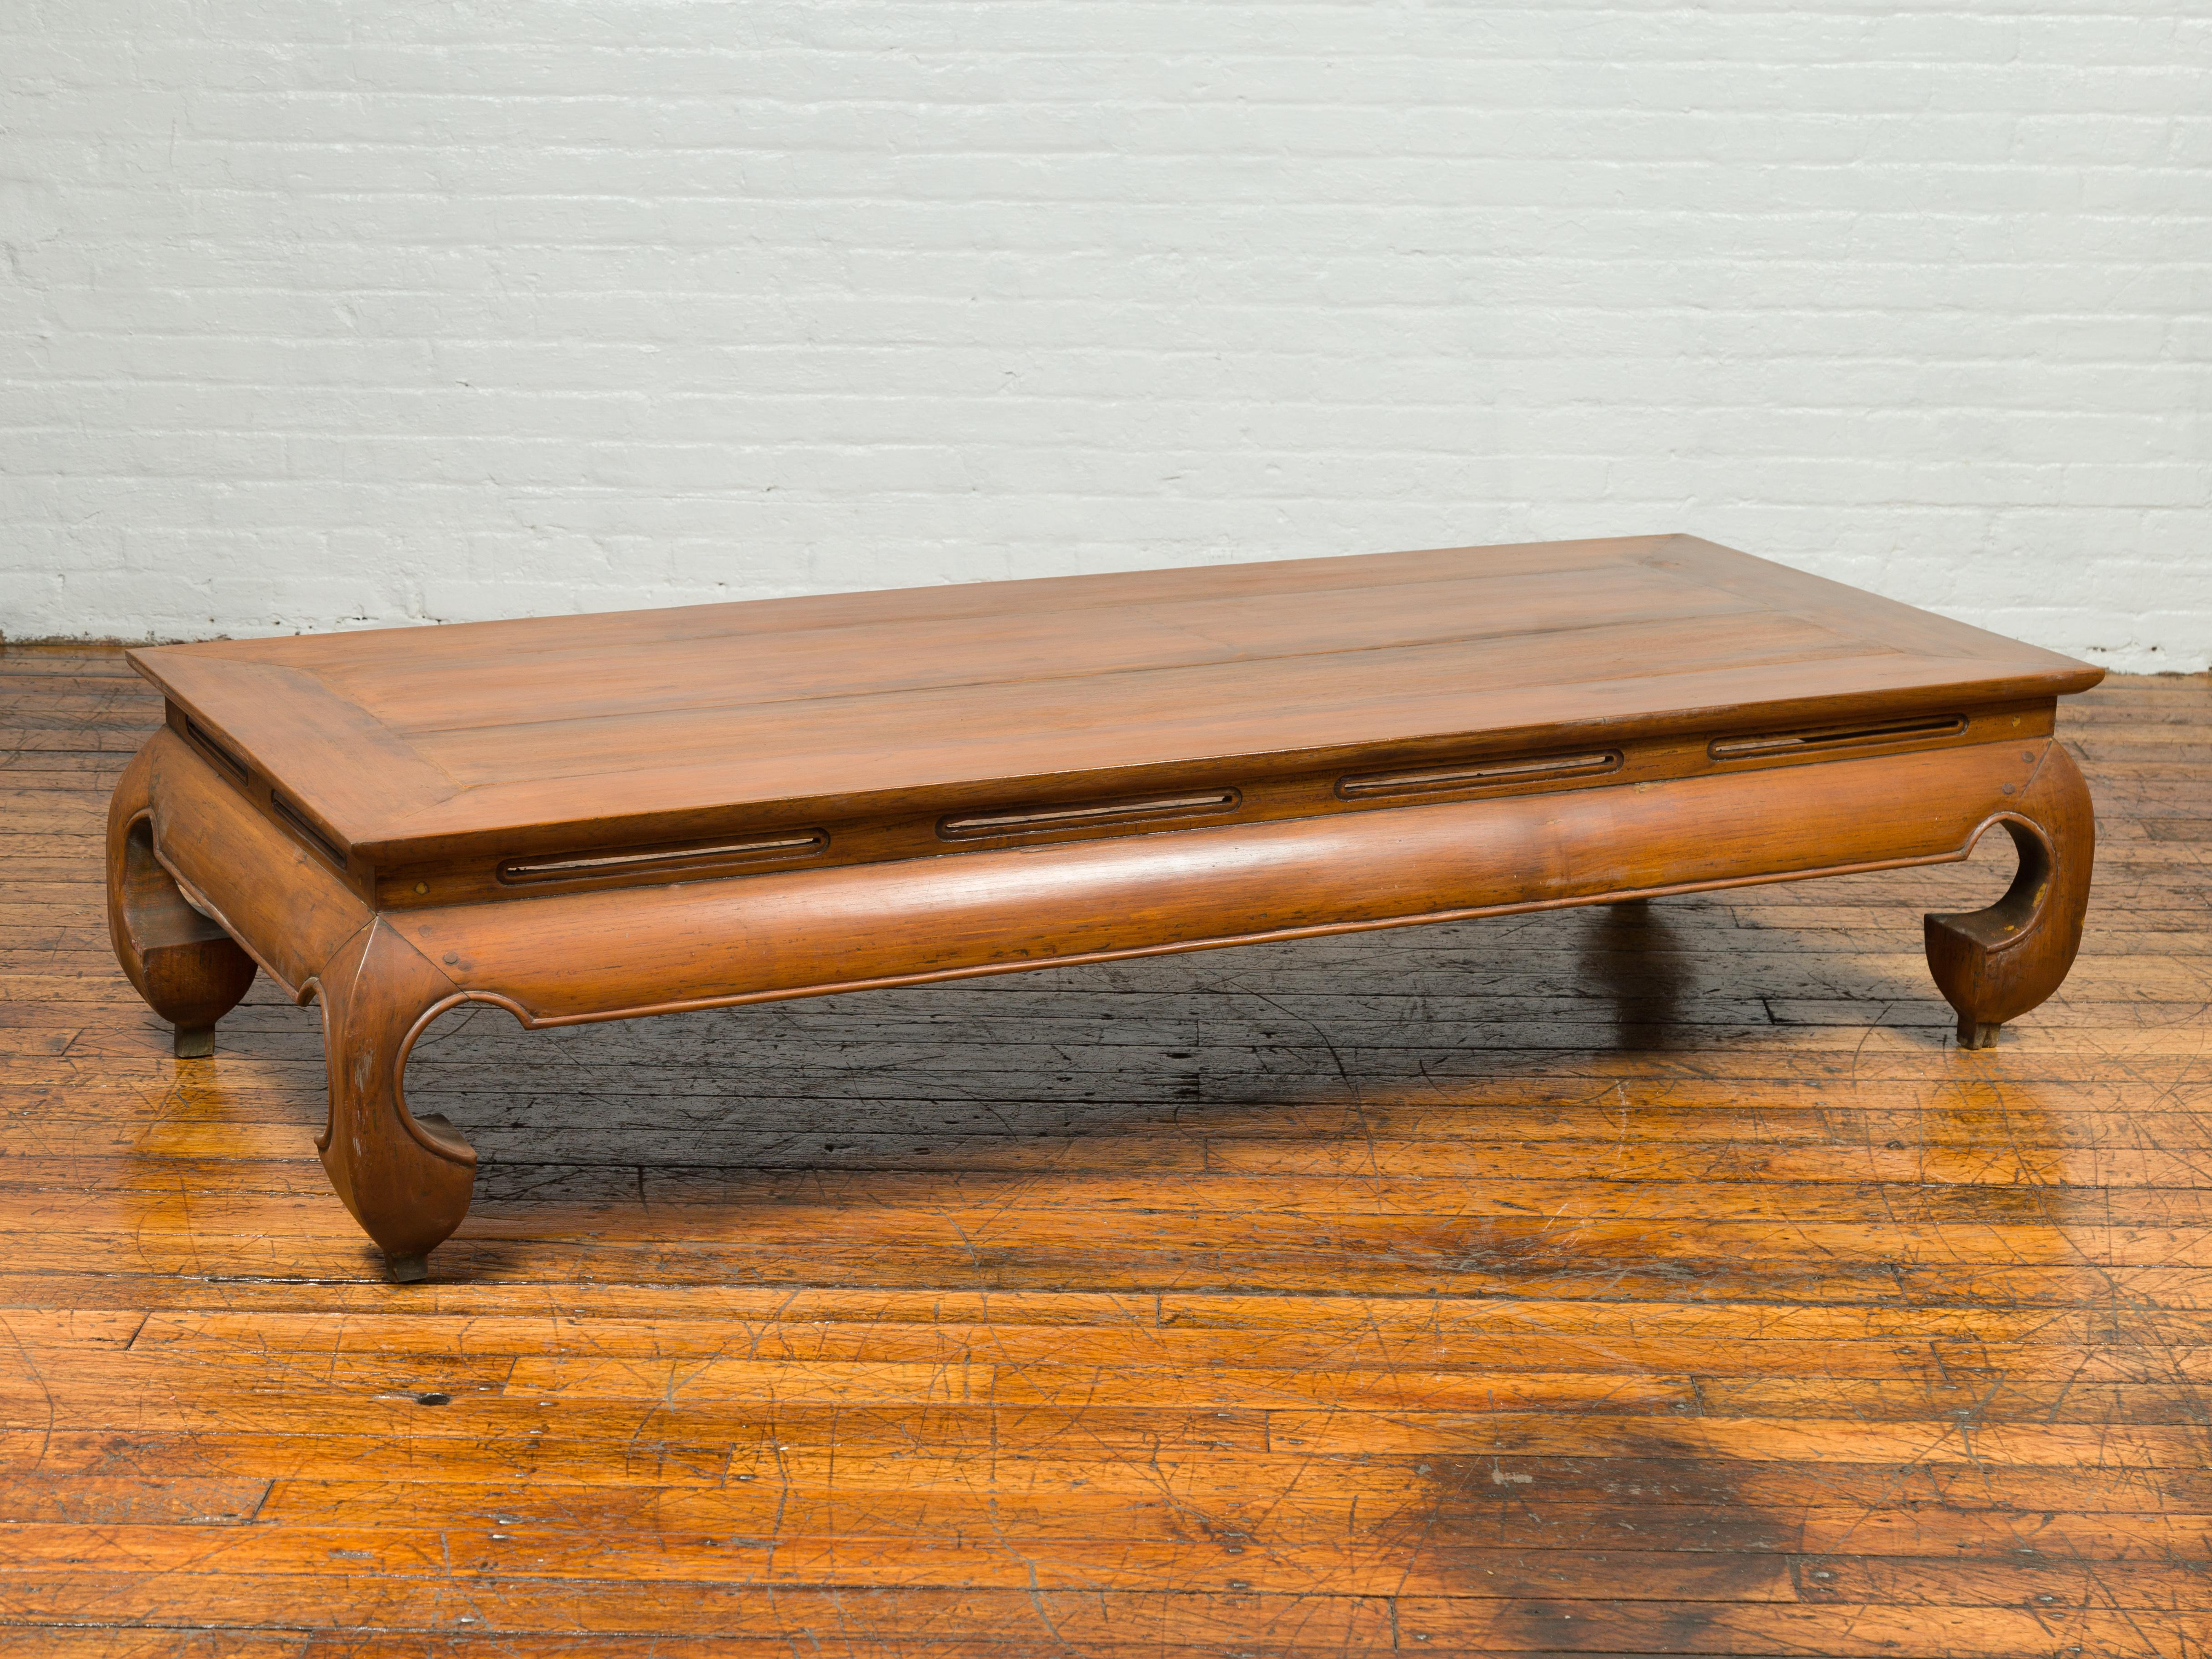 20th Century Chinese Ming Dynasty Style Coffee Table with Natural Patina and Chow Legs